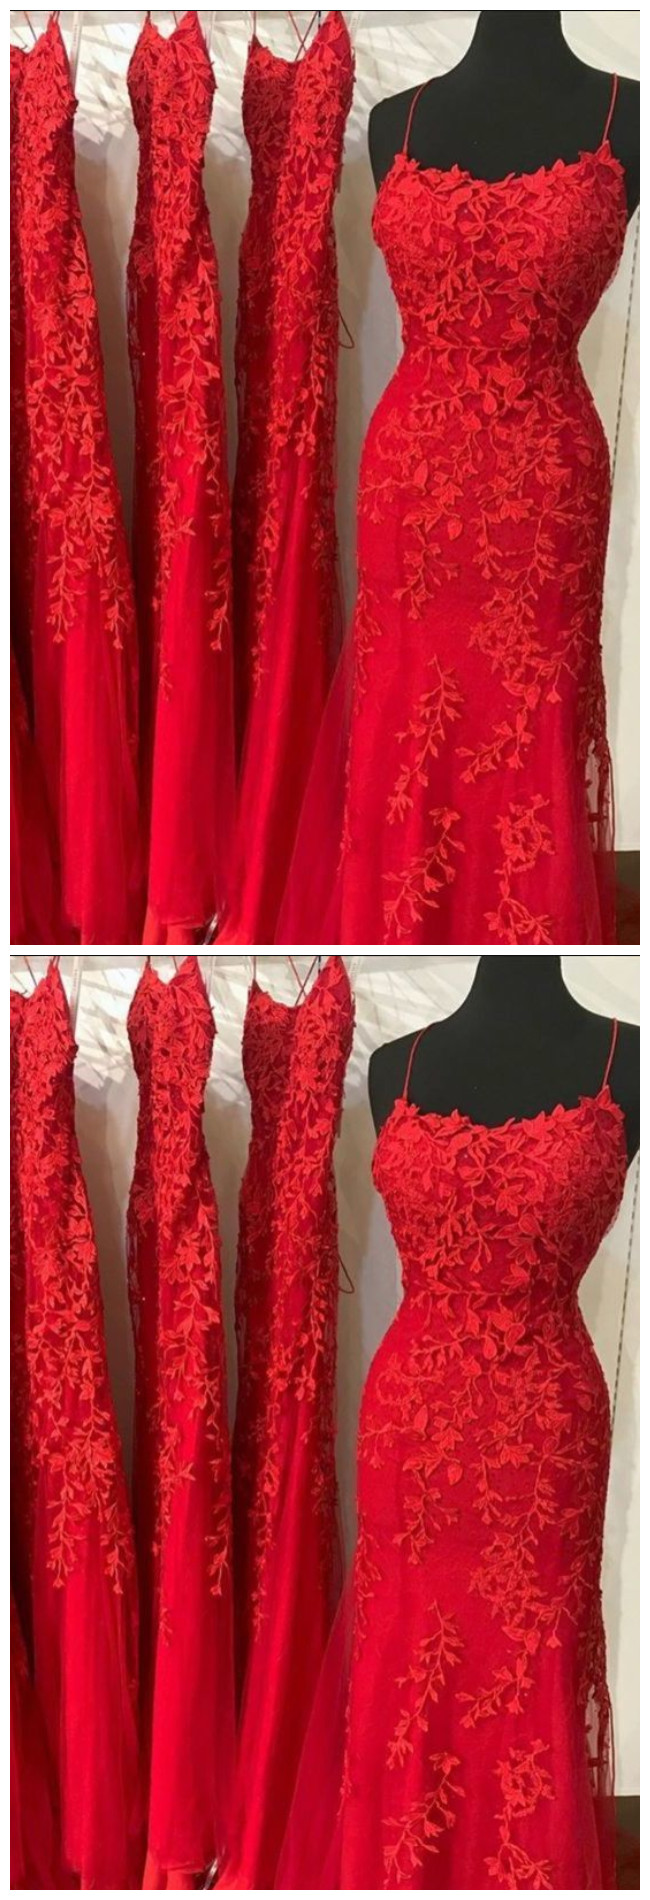 Red Lace Prom Dresses, Mermaid Long Prom Dresses, Evening Party Dresses For Women